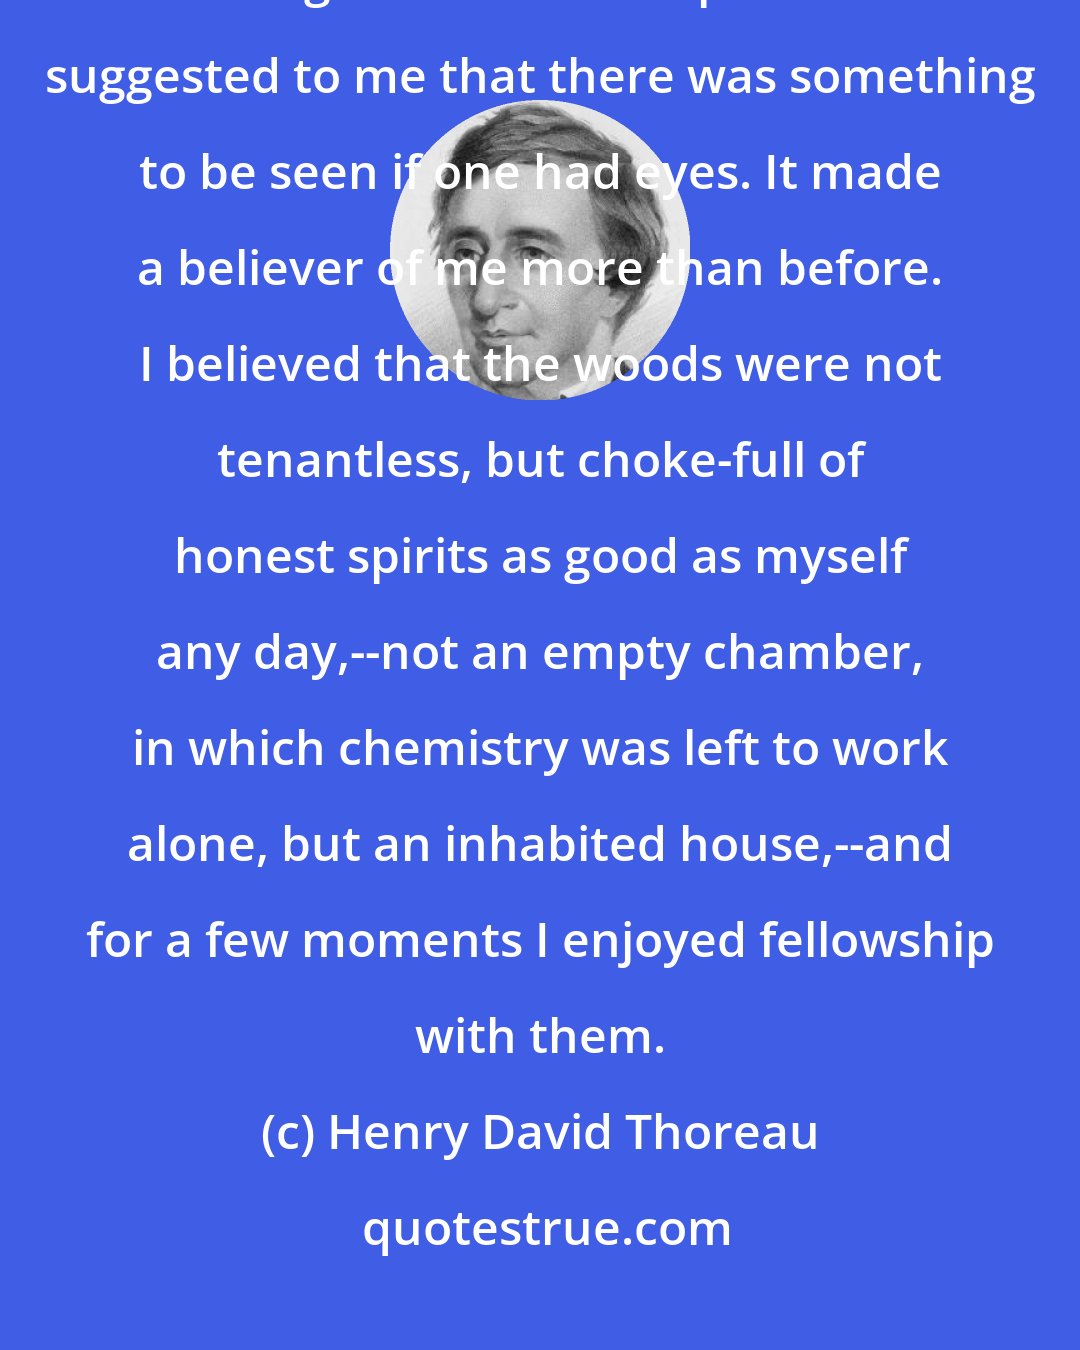 Henry David Thoreau: Science with its retorts would have put me to sleep; it was the opportunity to be ignorant that I improved. It suggested to me that there was something to be seen if one had eyes. It made a believer of me more than before. I believed that the woods were not tenantless, but choke-full of honest spirits as good as myself any day,--not an empty chamber, in which chemistry was left to work alone, but an inhabited house,--and for a few moments I enjoyed fellowship with them.